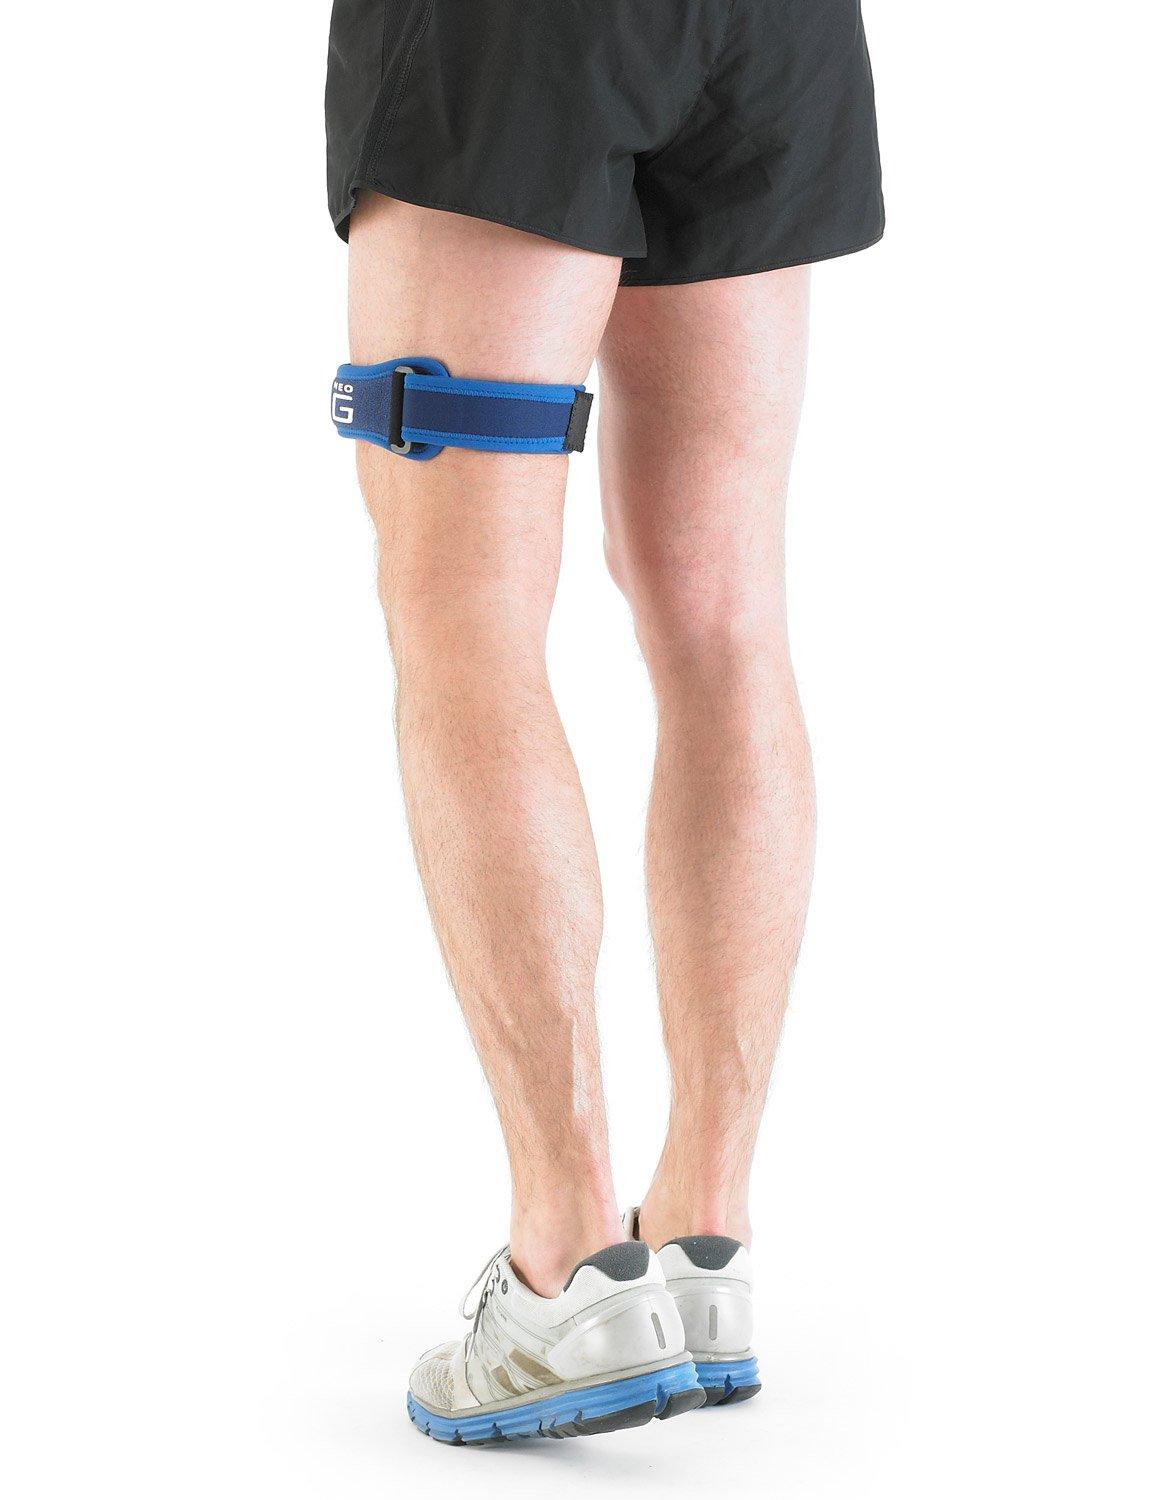 Neo-G ITB Band - Knee Strap For Jumpers Knee, Tendonitis, Joint